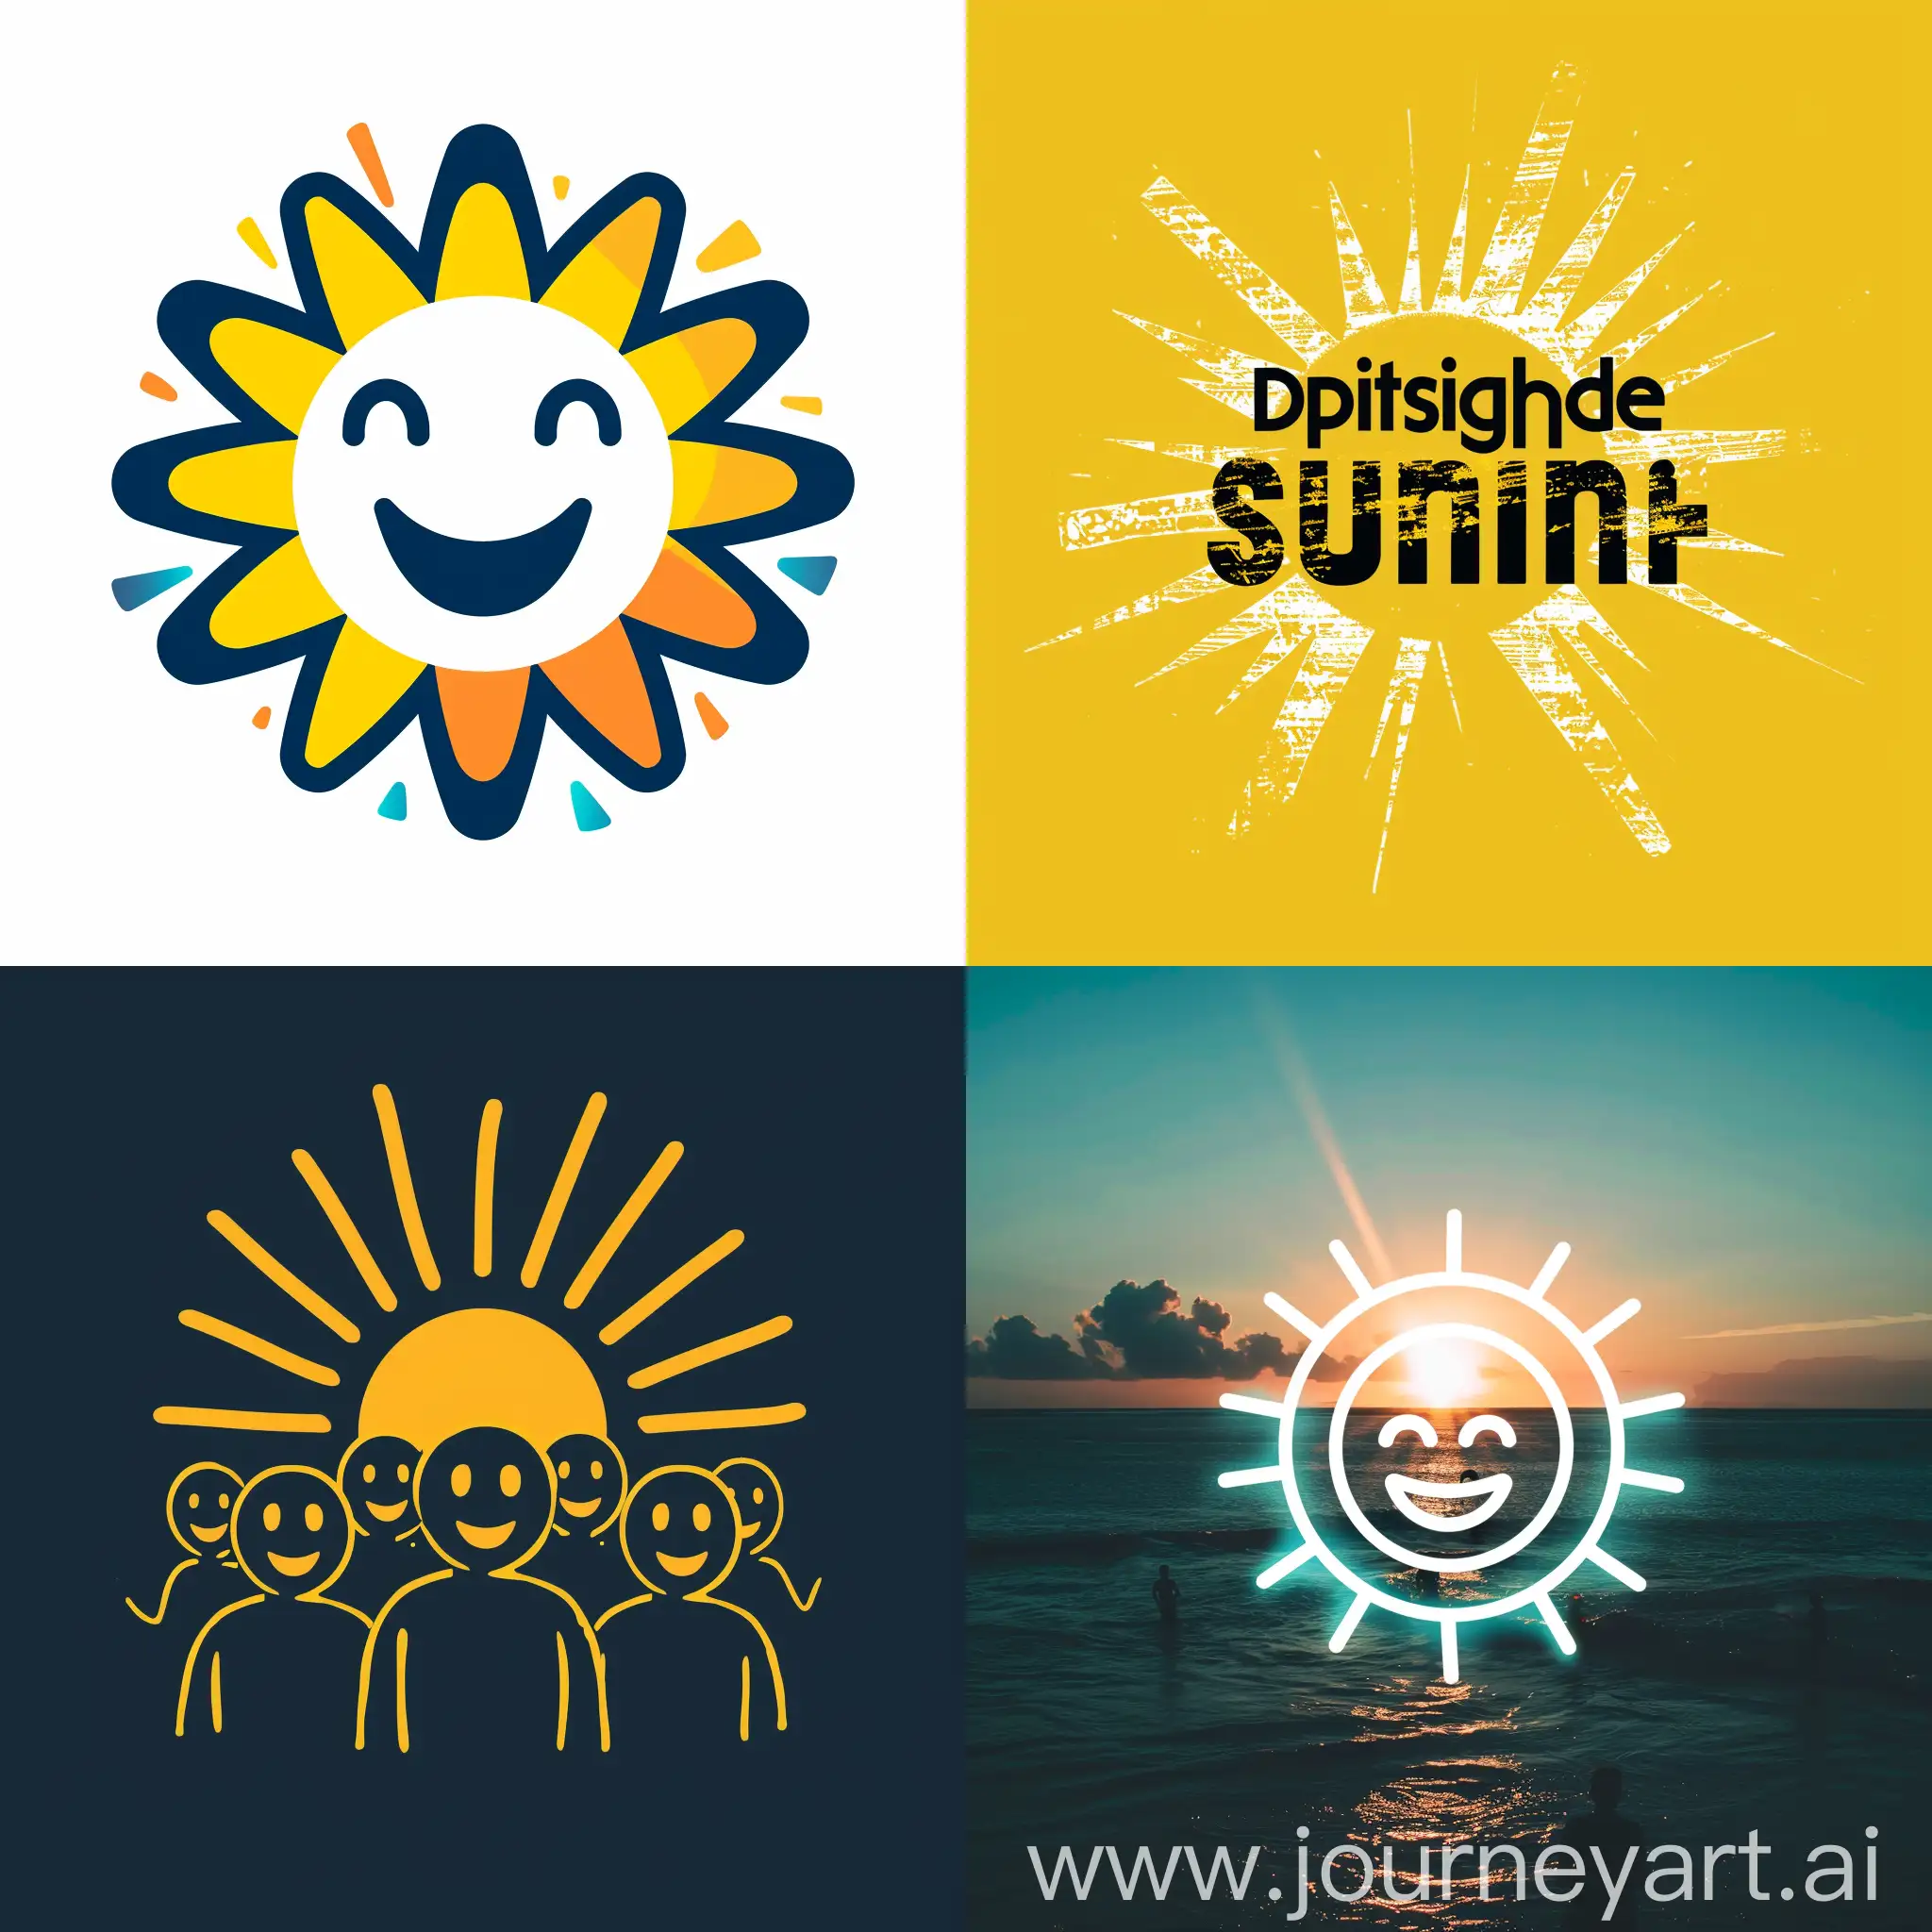 Make a logo for an young digitale marketing agency by the name Digitale Sunlight - we are based in Aarhus Denmark and makes people smile and come together 